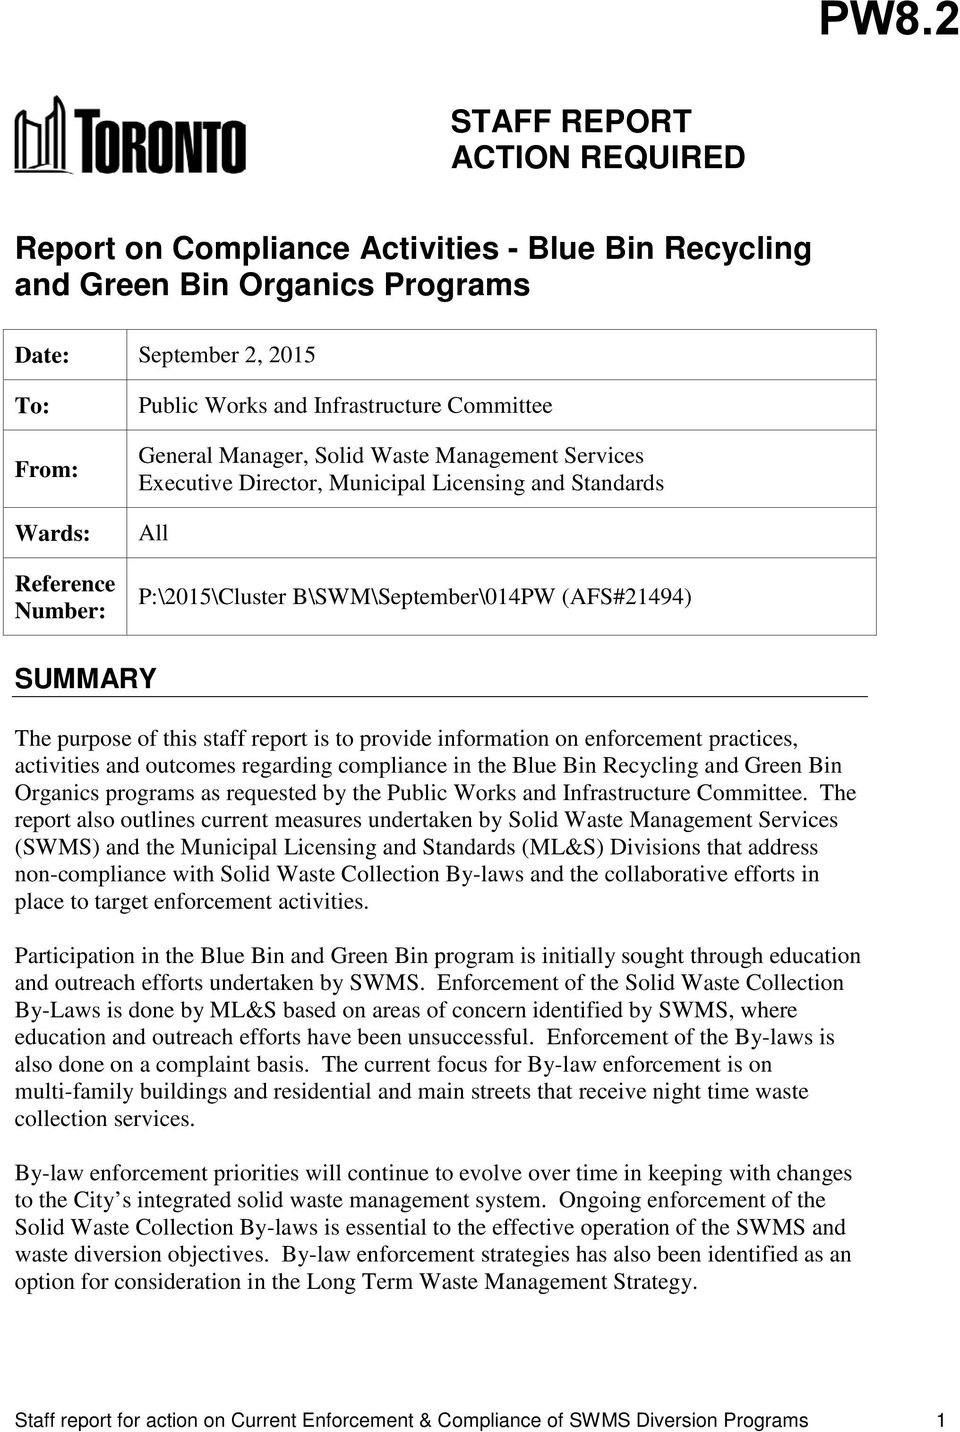 purpose of this staff report is to provide information on enforcement practices, activities and outcomes regarding compliance in the Blue Bin Recycling and Green Bin Organics programs as requested by